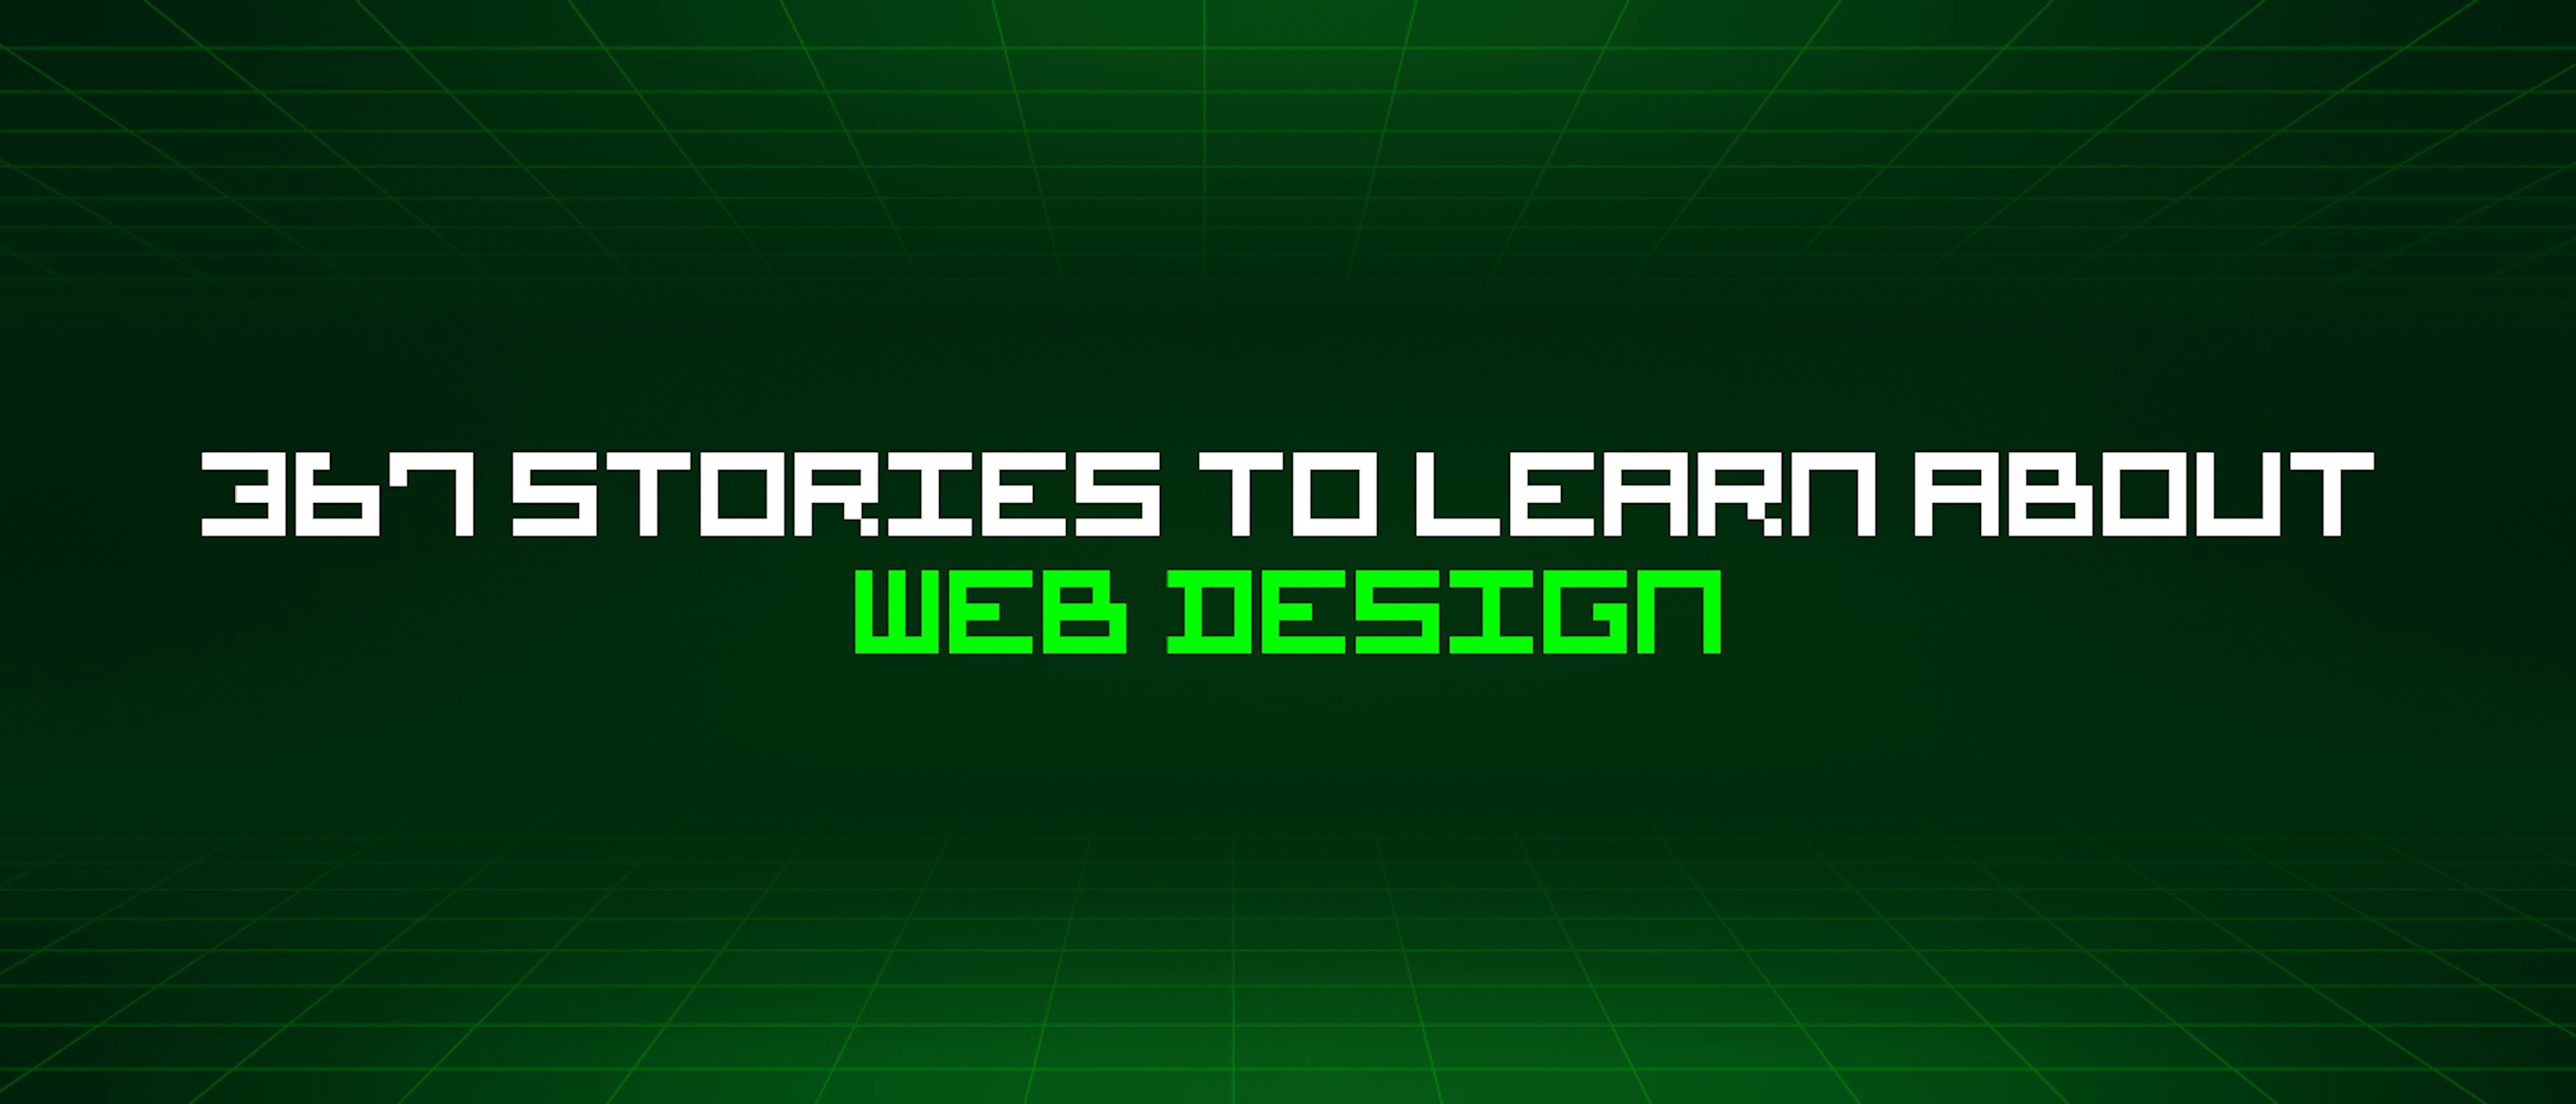 featured image - 367 Stories To Learn About Web Design